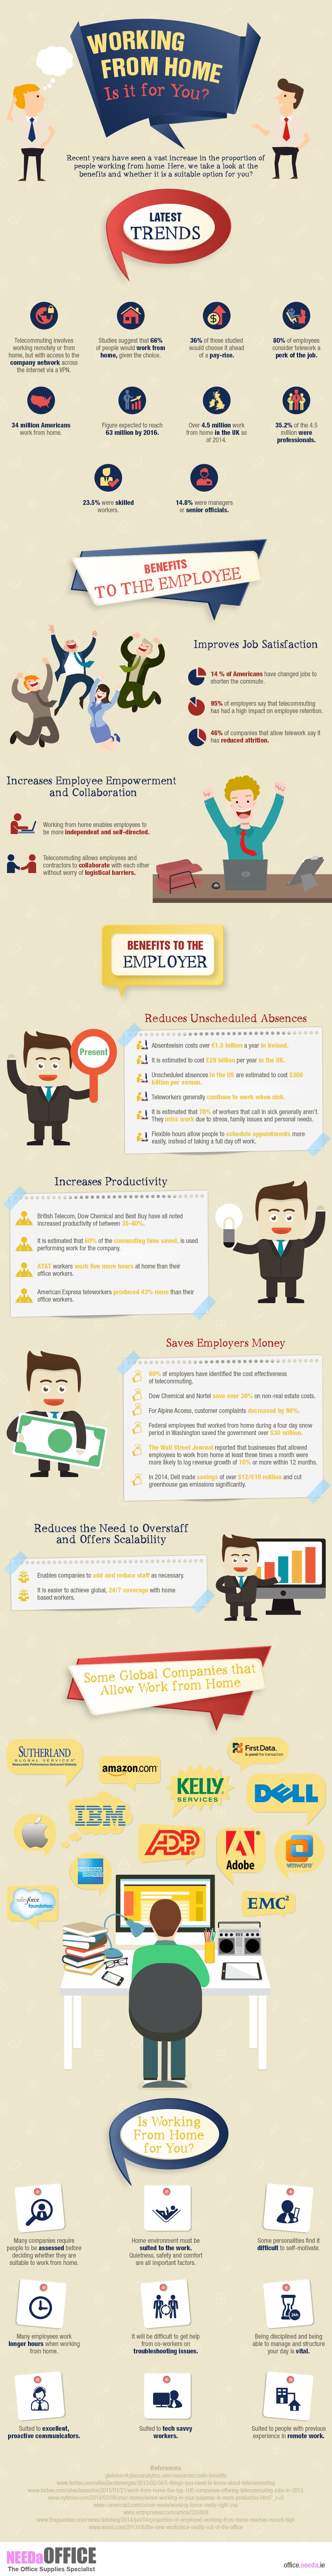 Working-From-Home-Infographic